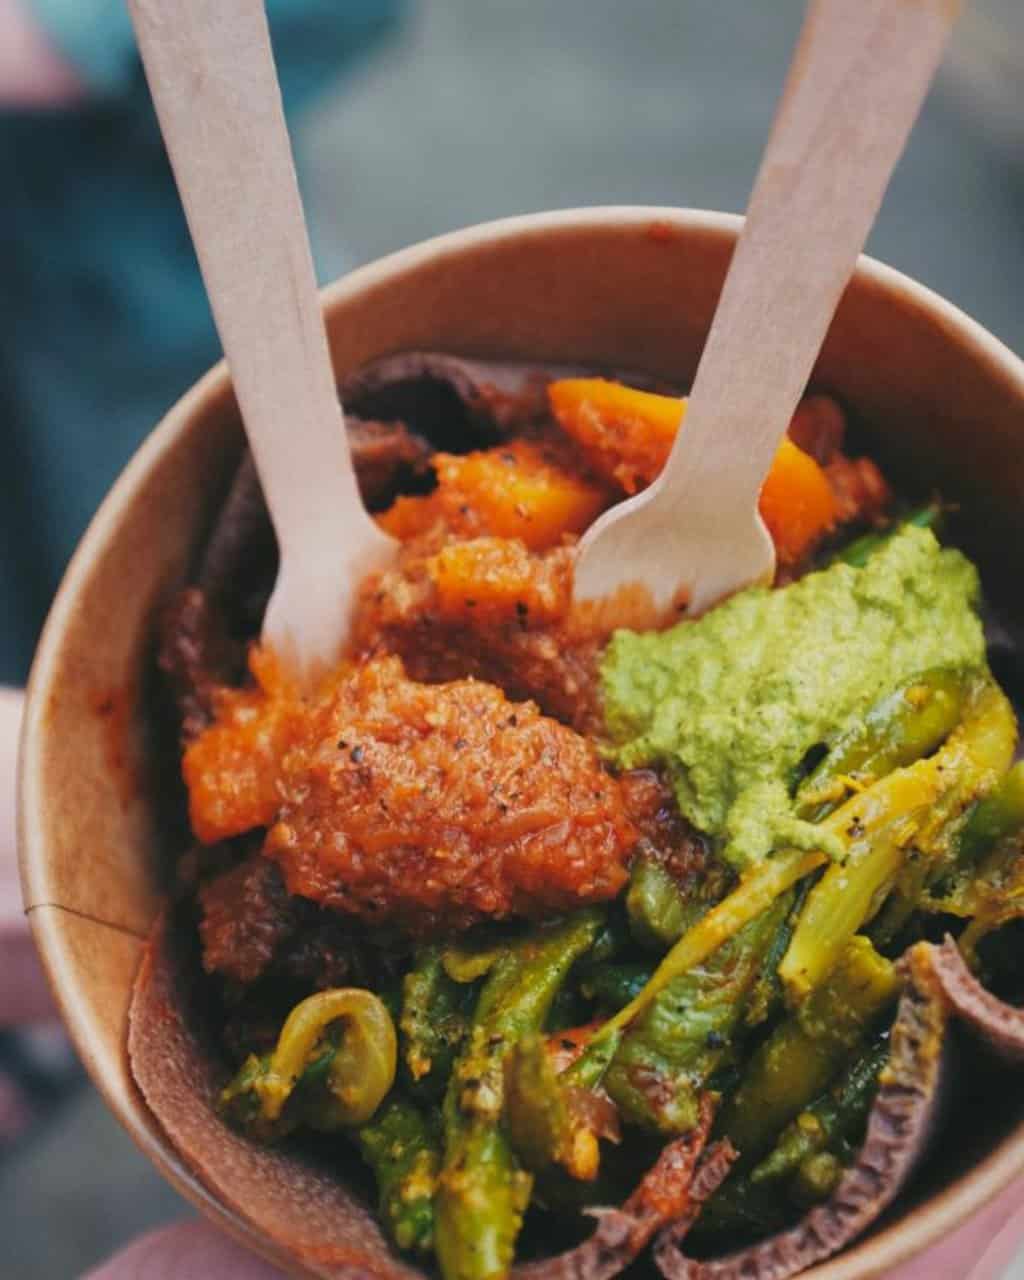 Bowl of food from the Maltby Street Food Market filled with sweet potato, guacamole and cooked vegetables